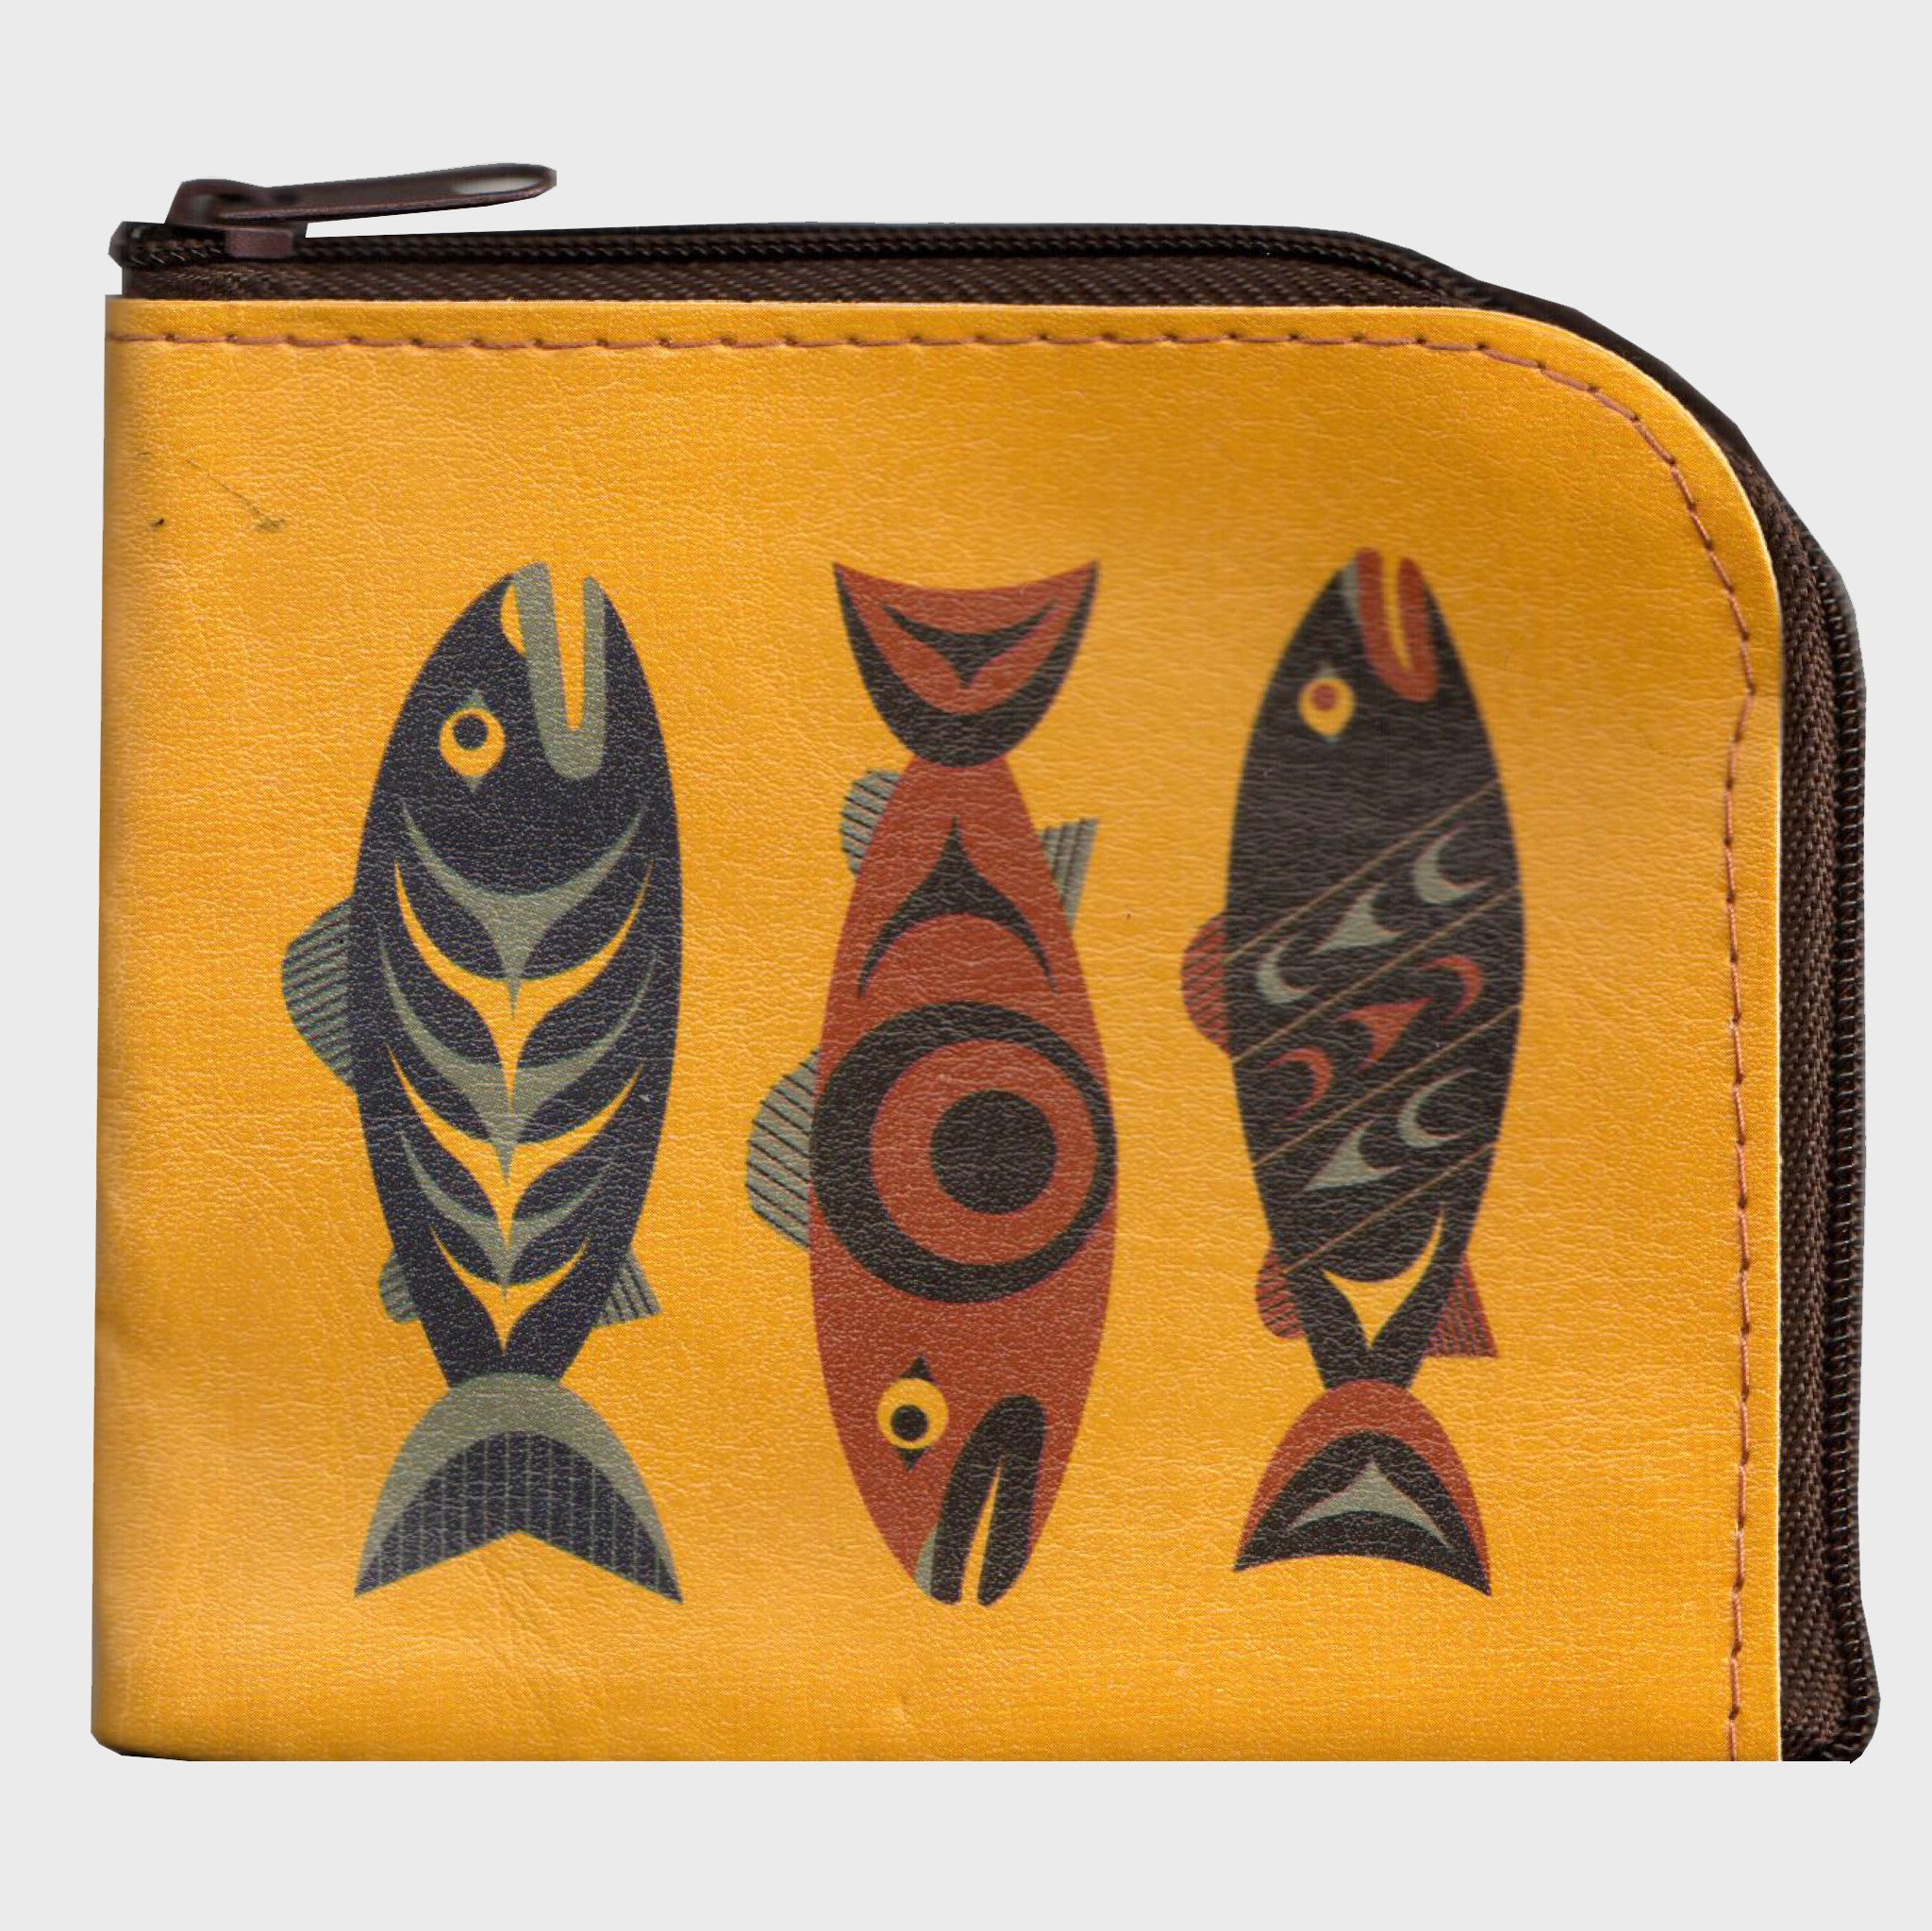 Native American Designed Coin Purse – Houston Museum of Natural Science